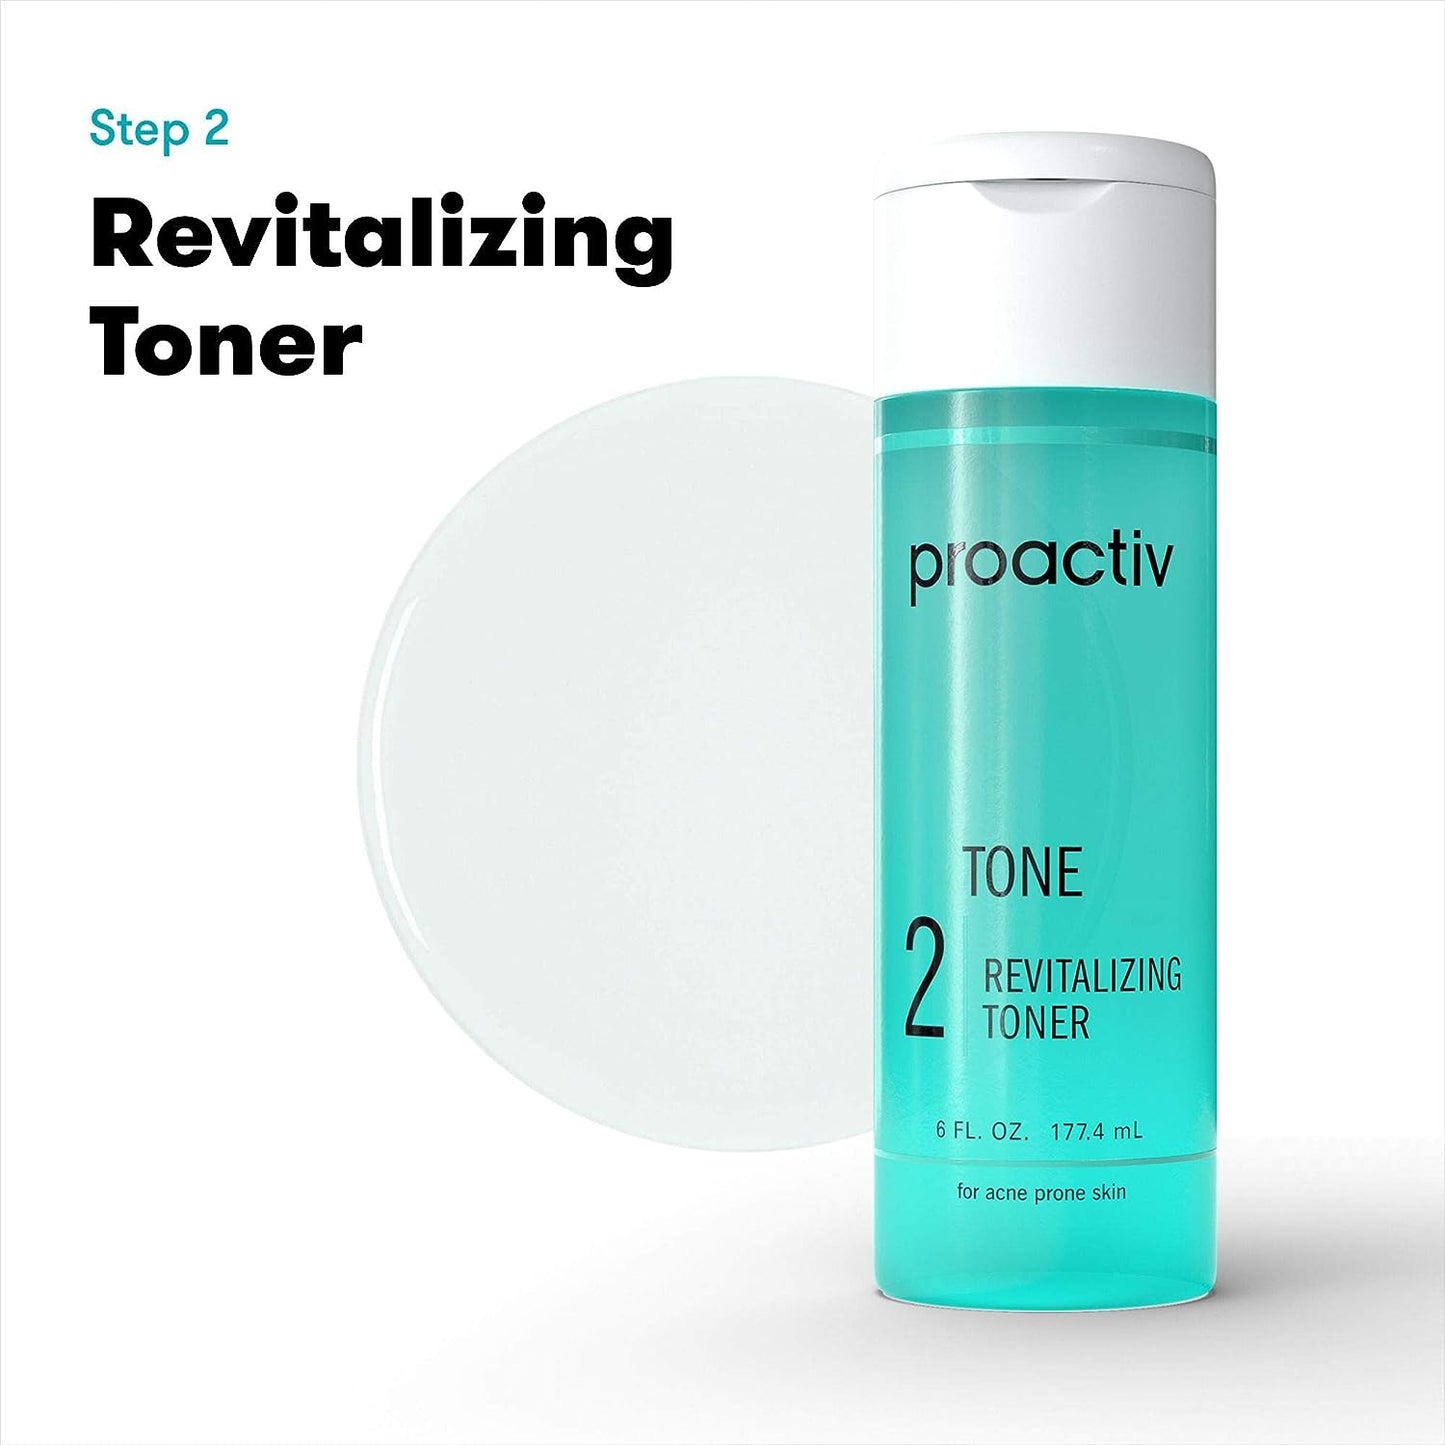 Proactiv 3-Step Acne Treatment System (90 Day)